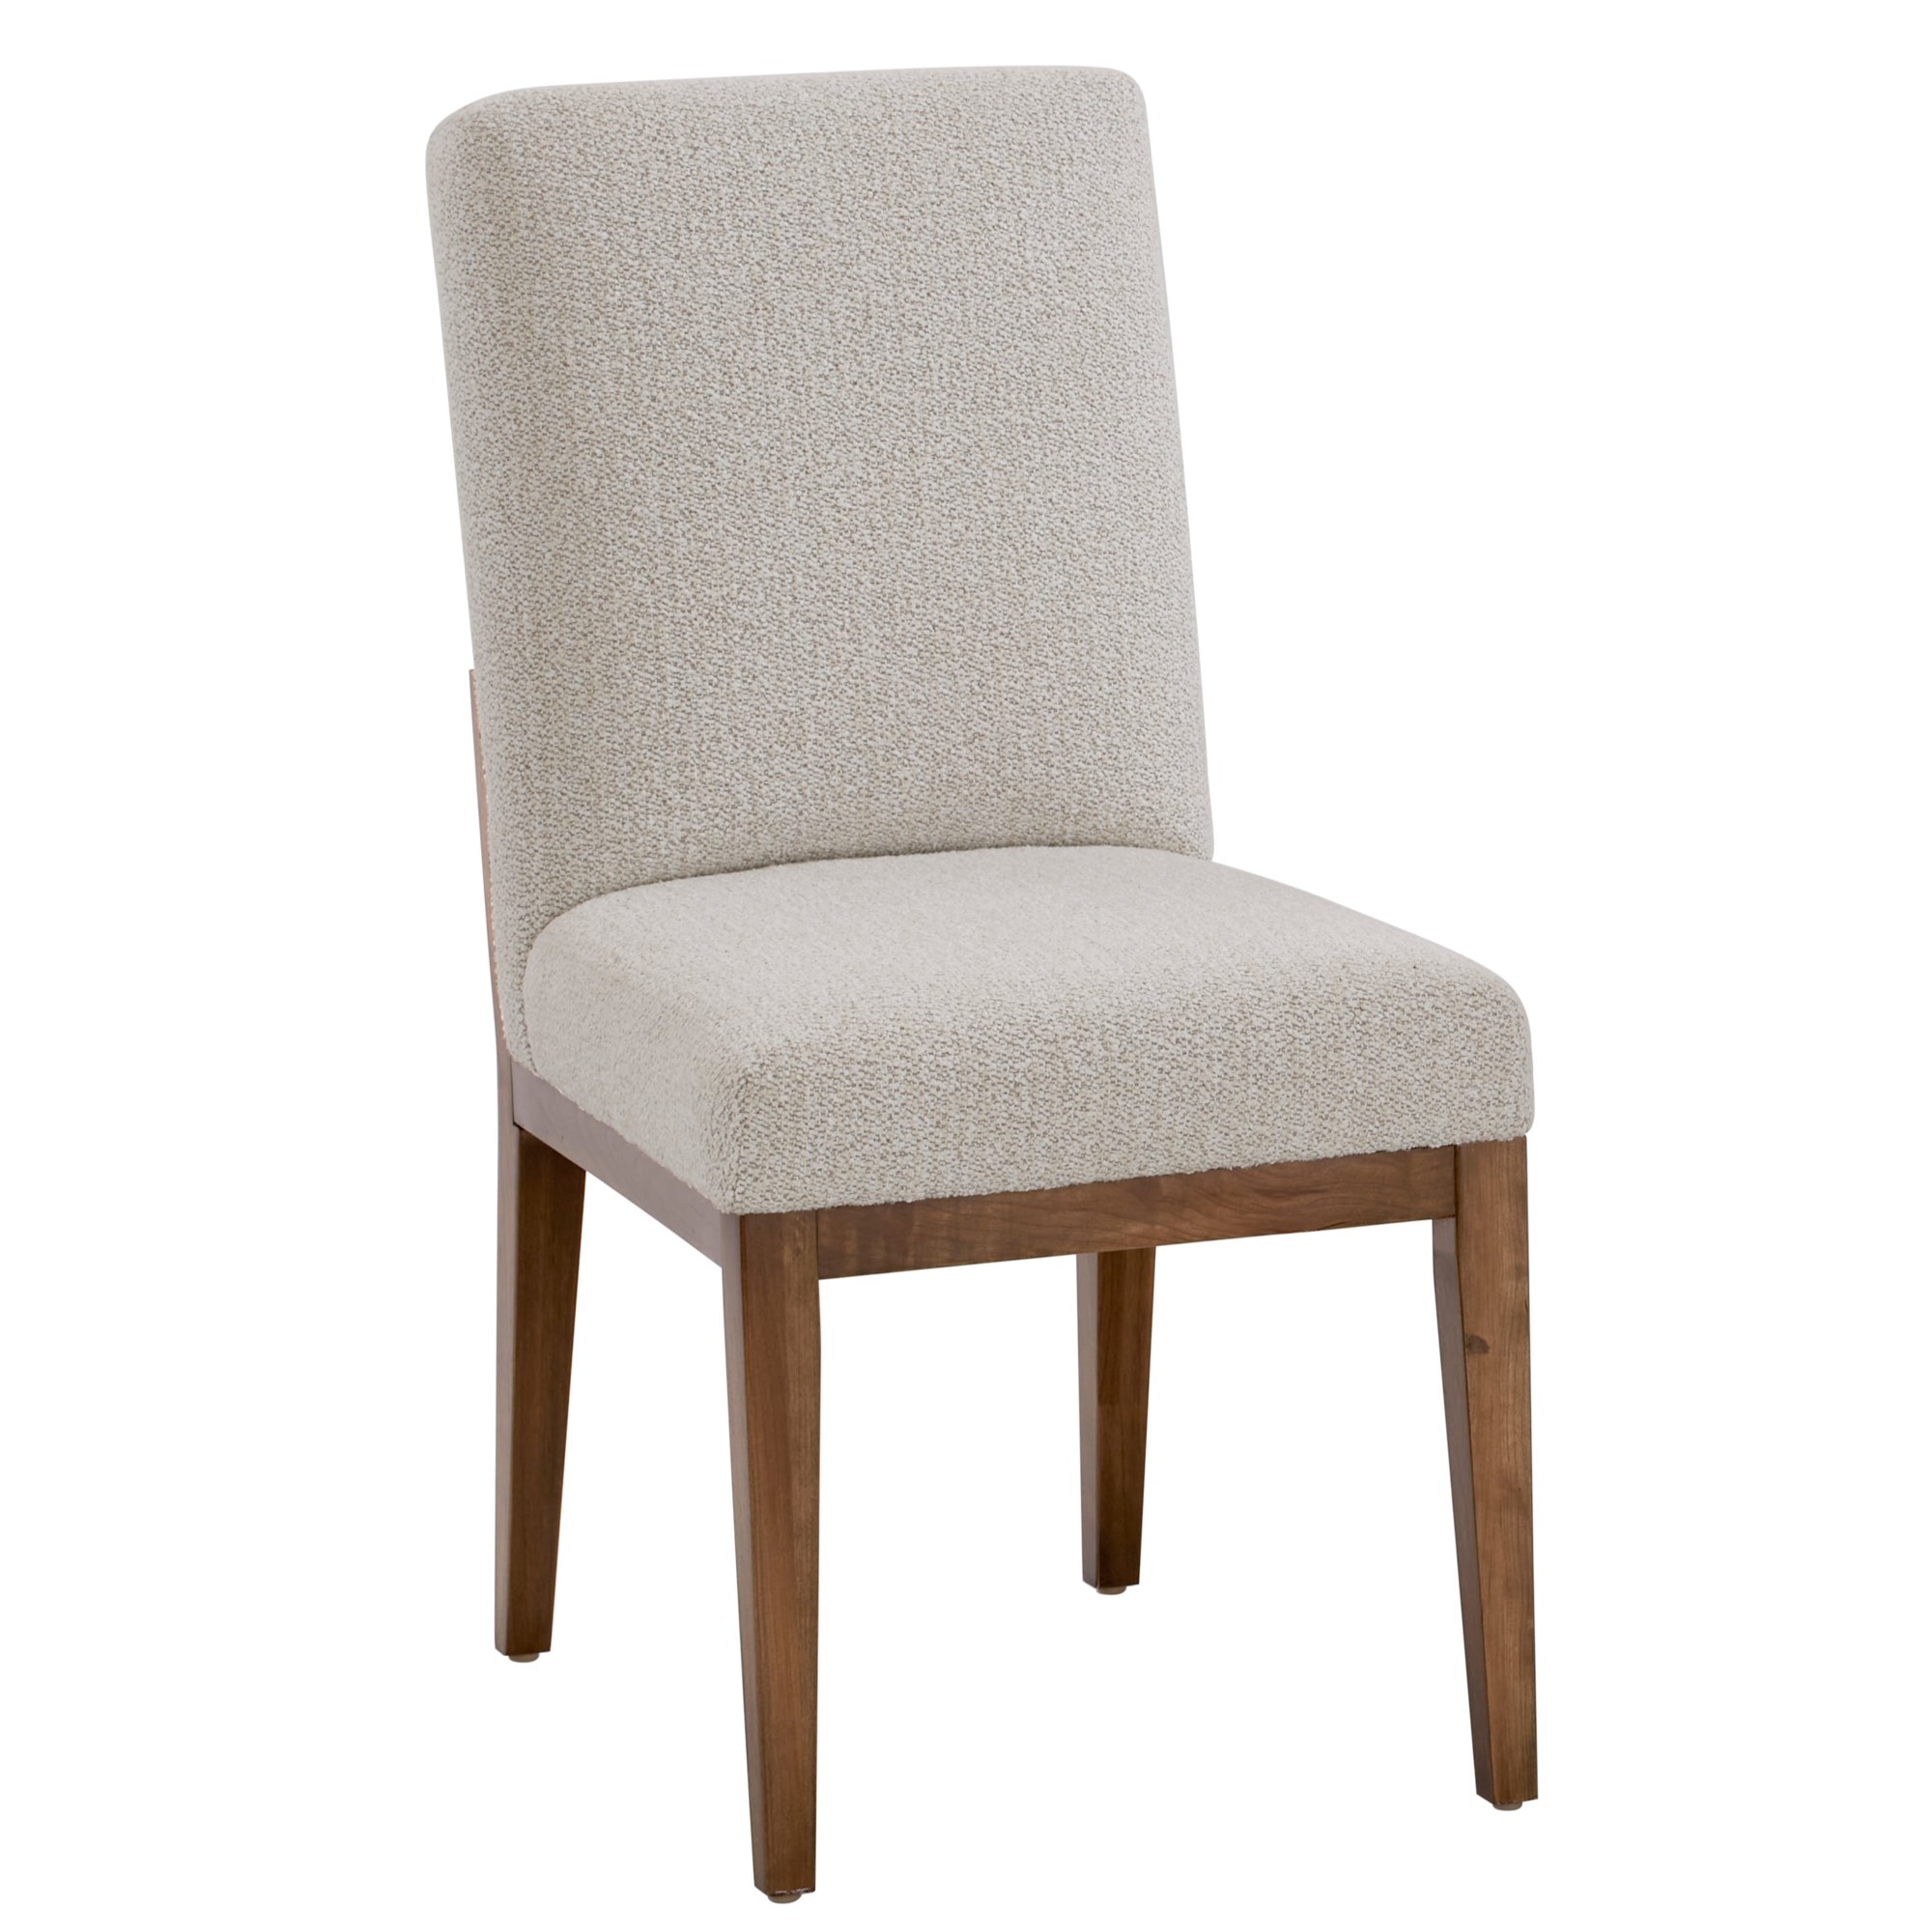 Contemporary Furniture Brown - Dining Chair | Upholstered | 151-030B Cherry Chair Medium Side Dining Vaughan Side Bassett Crafted - Squirrel Chairs